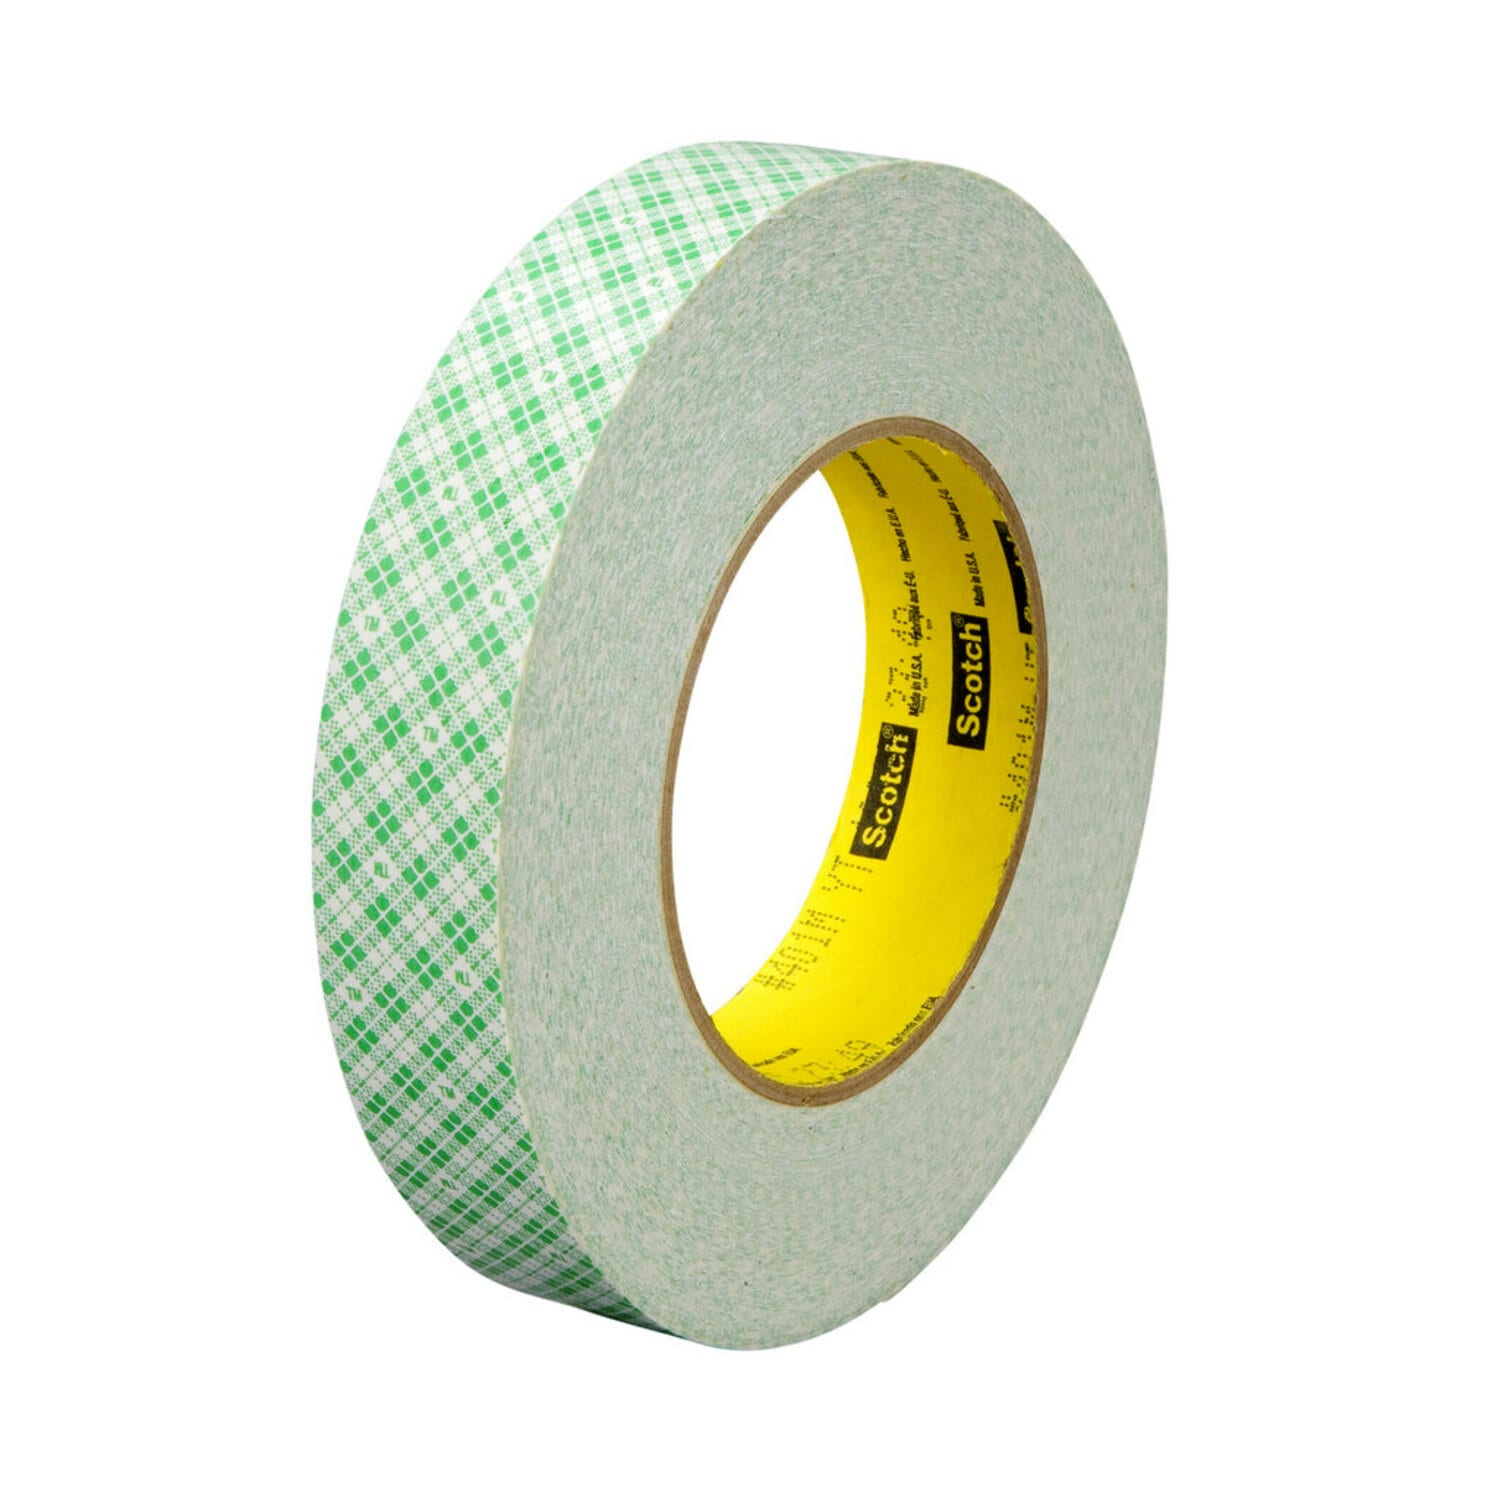 7010292785 - 3M Double Coated Paper Tape 401M, Natural, 1/2 in x 36 yd, 9 mil, 72
rolls per case